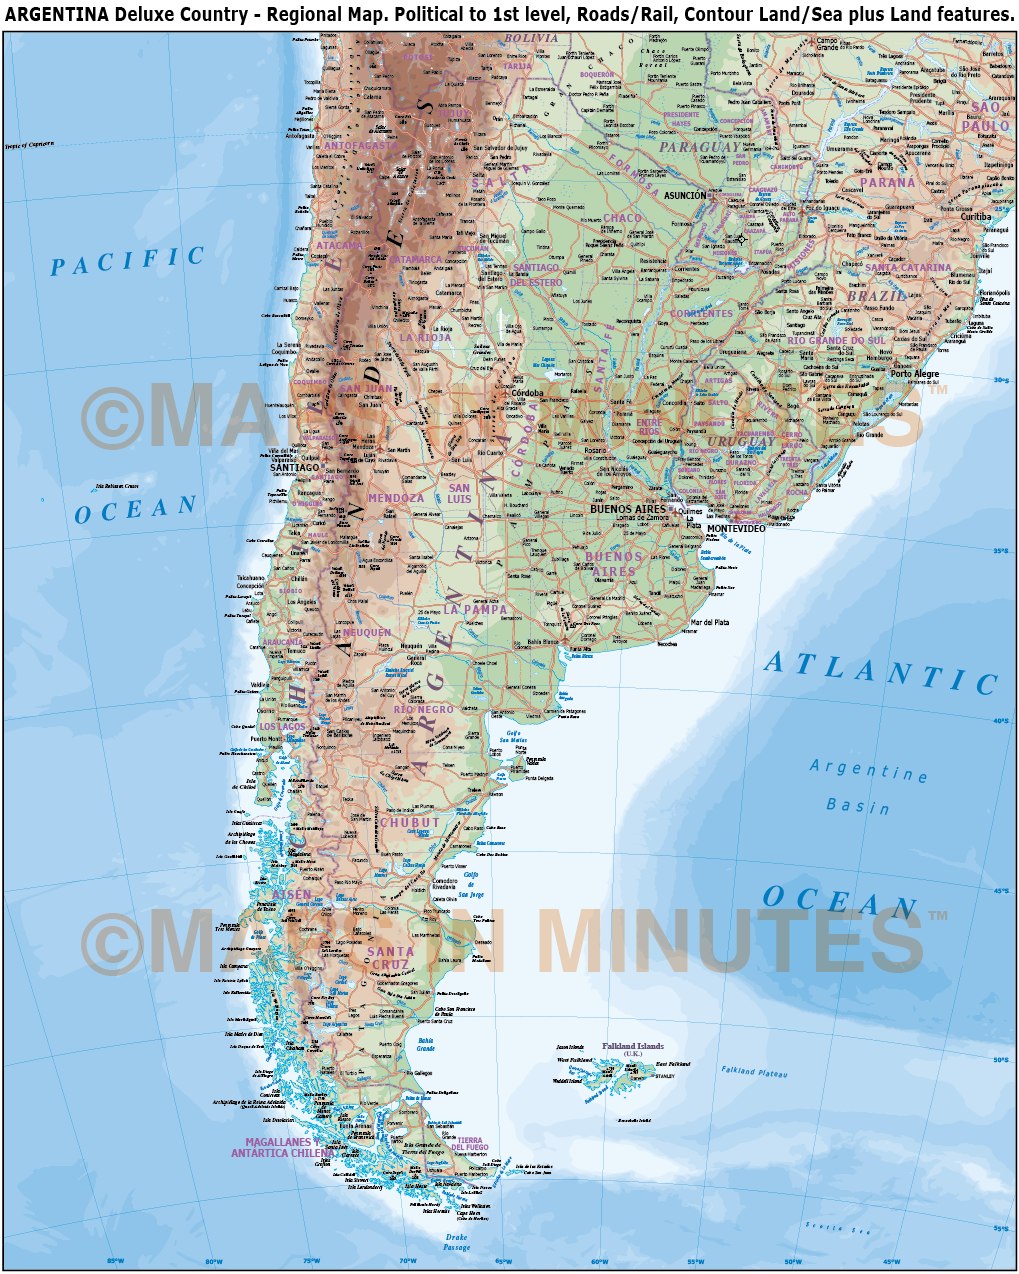 Digital Vector Argentina Deluxe Political Road And Rail Map Plus Land And